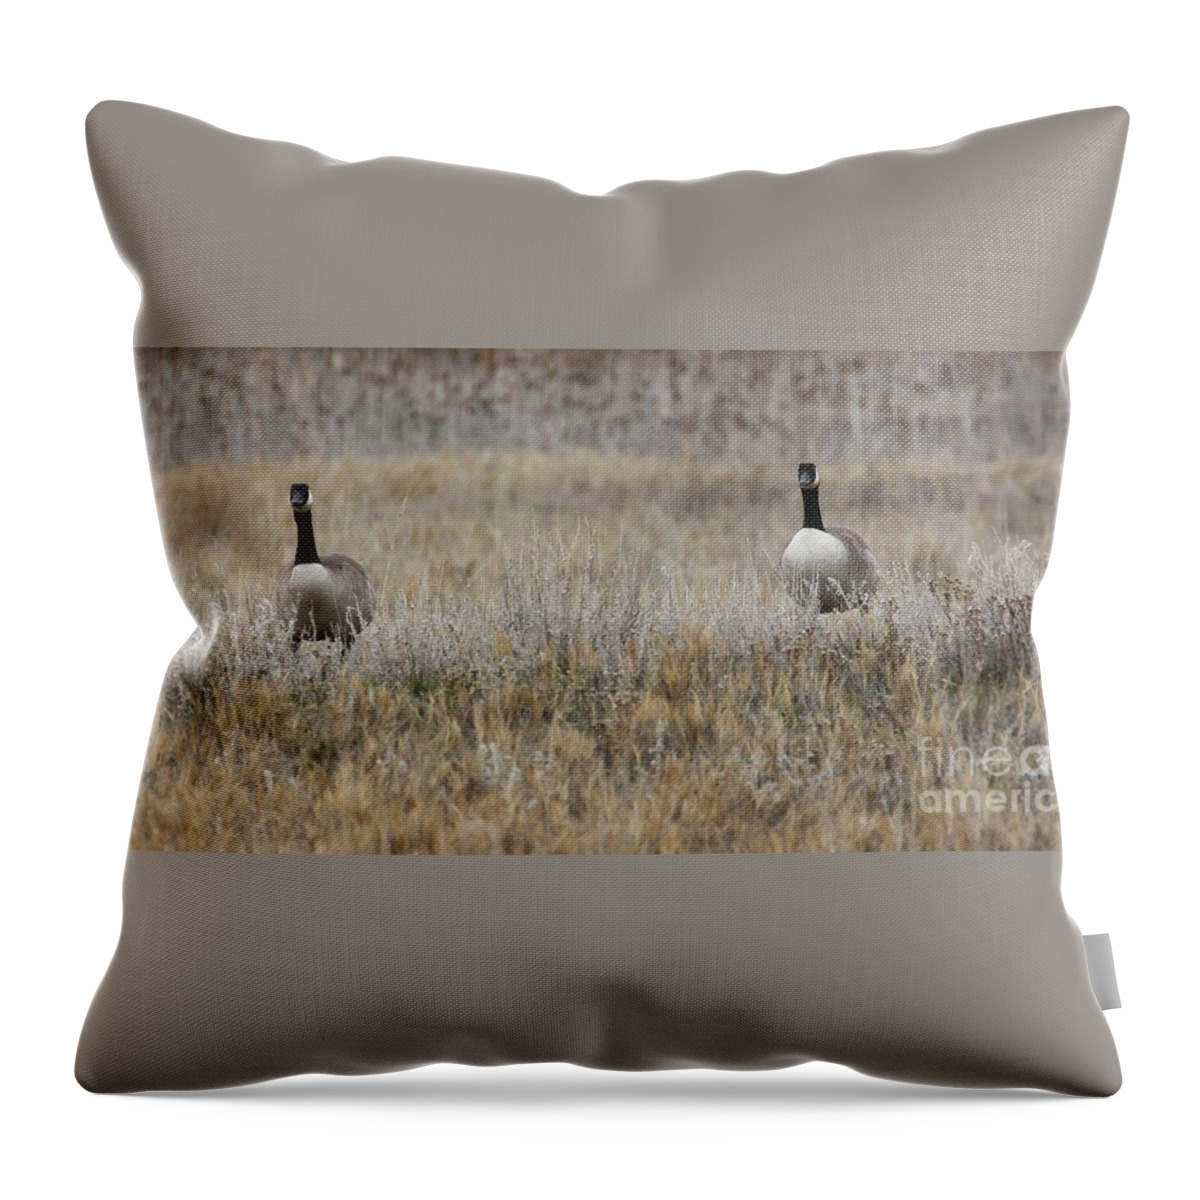 Canadian Geese Throw Pillow featuring the photograph Coupling by Richard Lynch